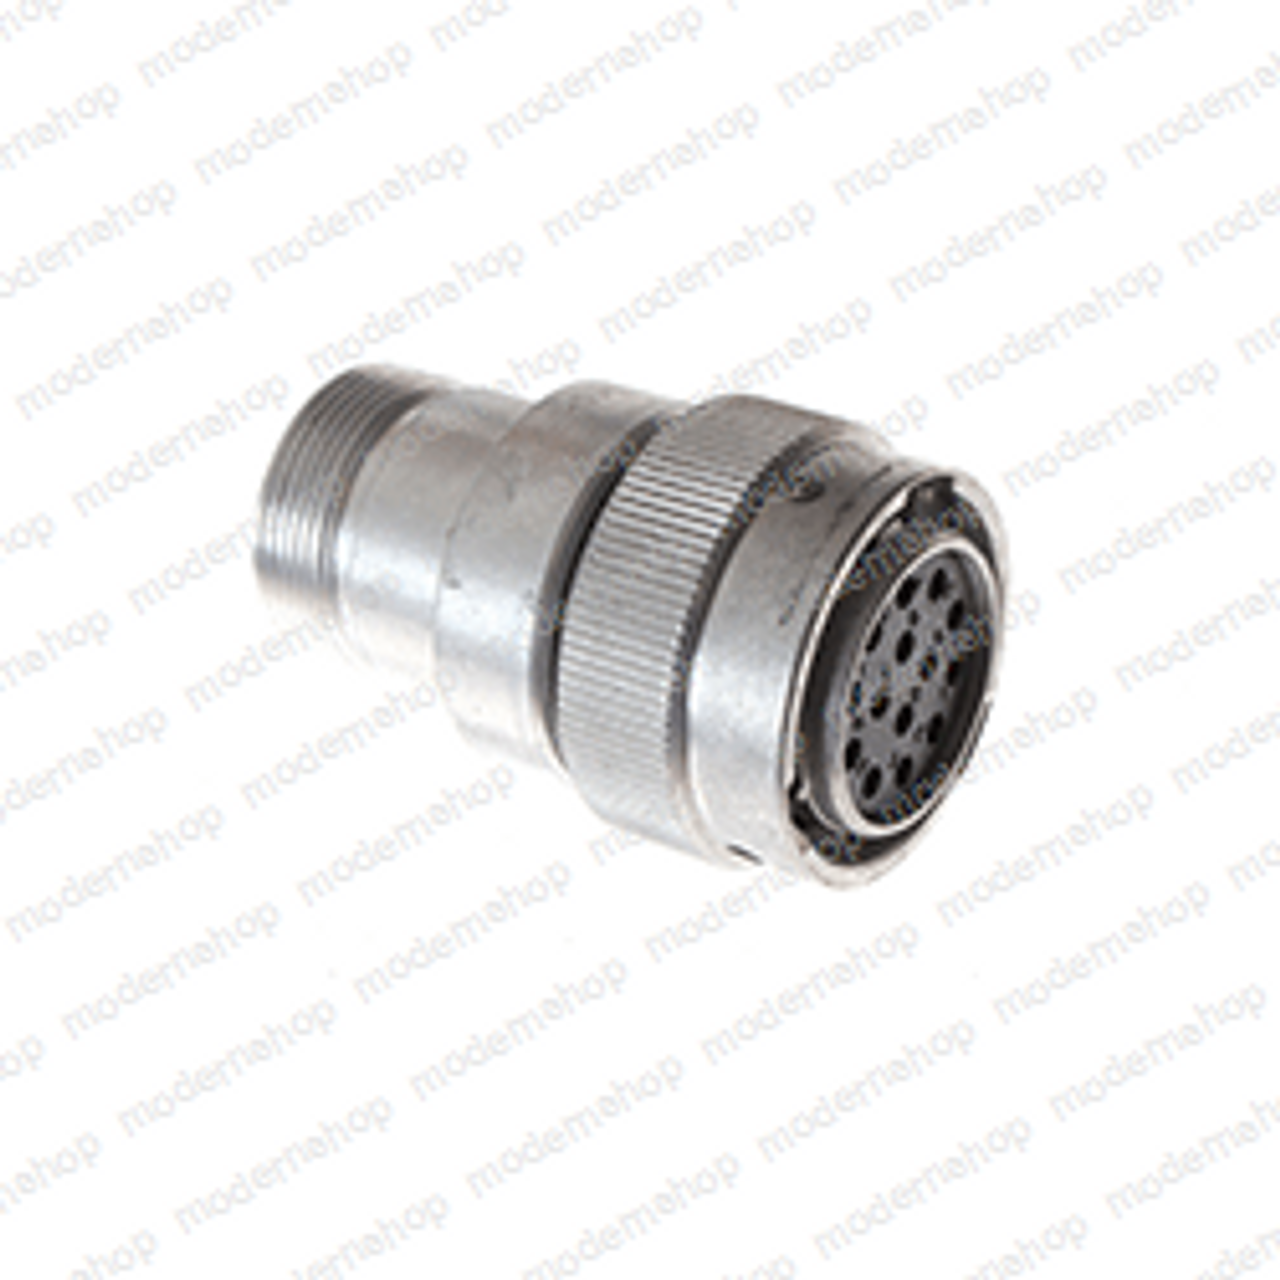 3049861: Snorkel PLUG CONNECTOR ASSEMBLY